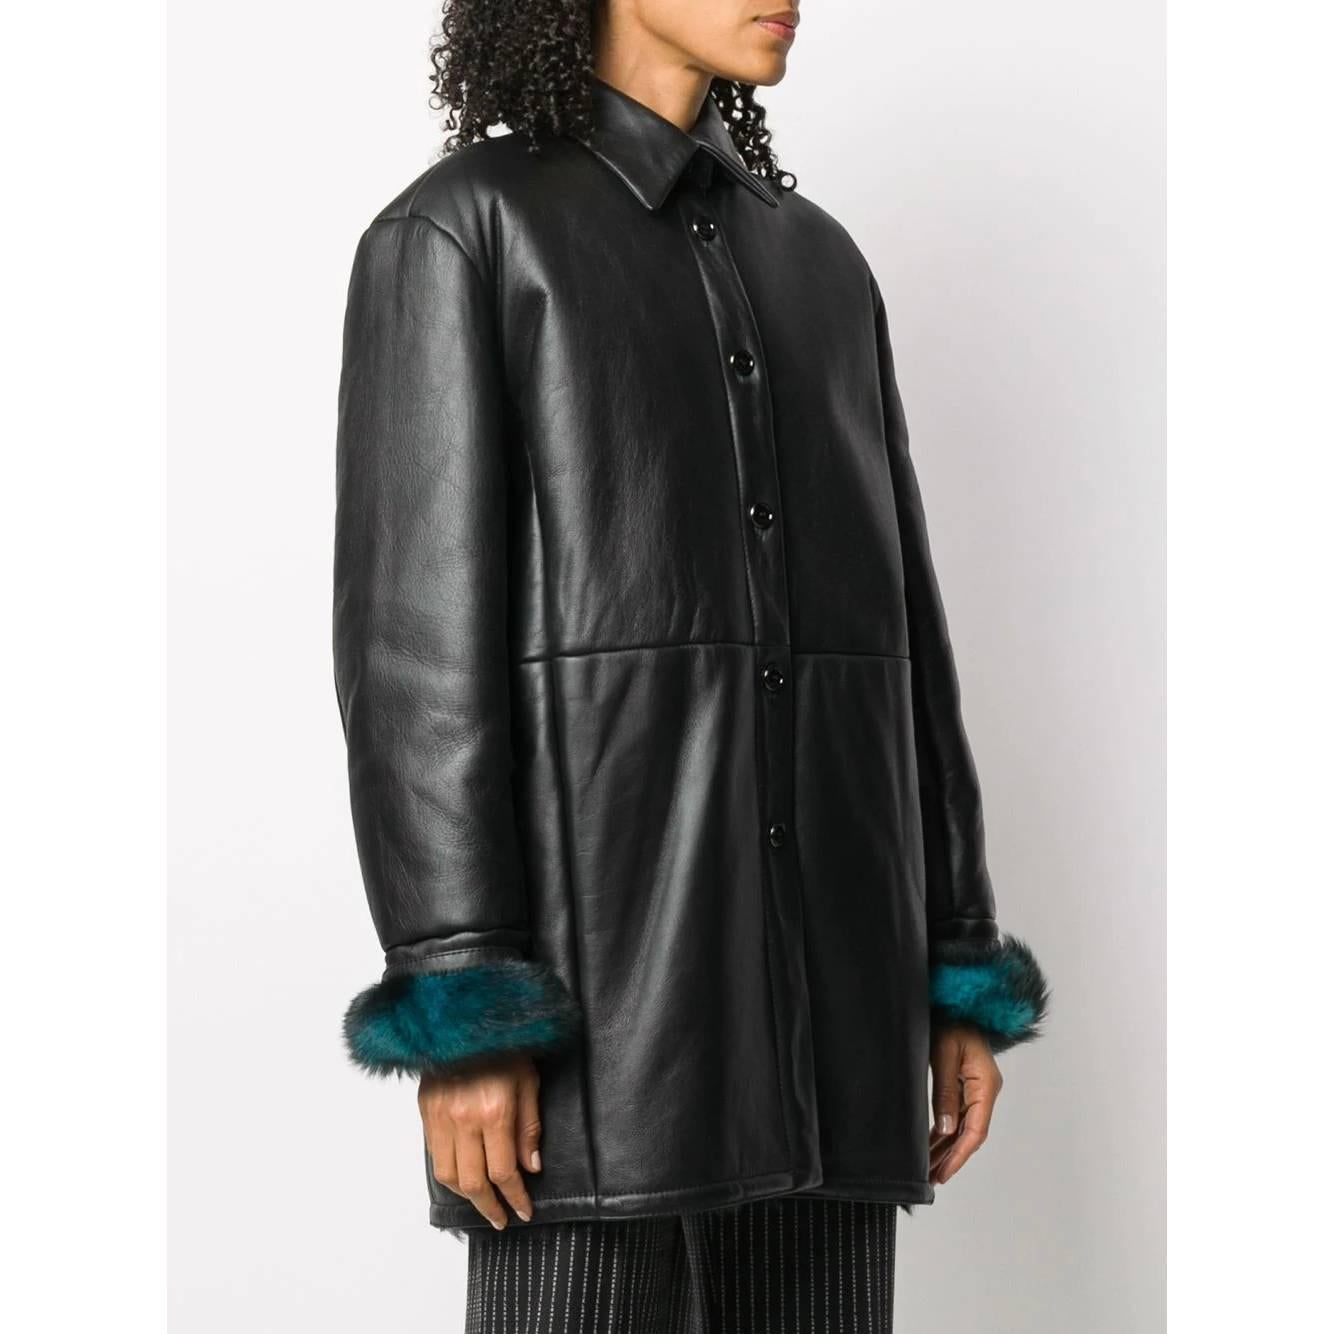 Gianfranco Ferré black midi leather coat. Cutaway collar, buttons front closure. Colored faux fur lining.

This item belongs to a deadstock, it has never been worn and comes with its original tag.

Years: 90s

Made in Italy

Size: 44 IT

Flat